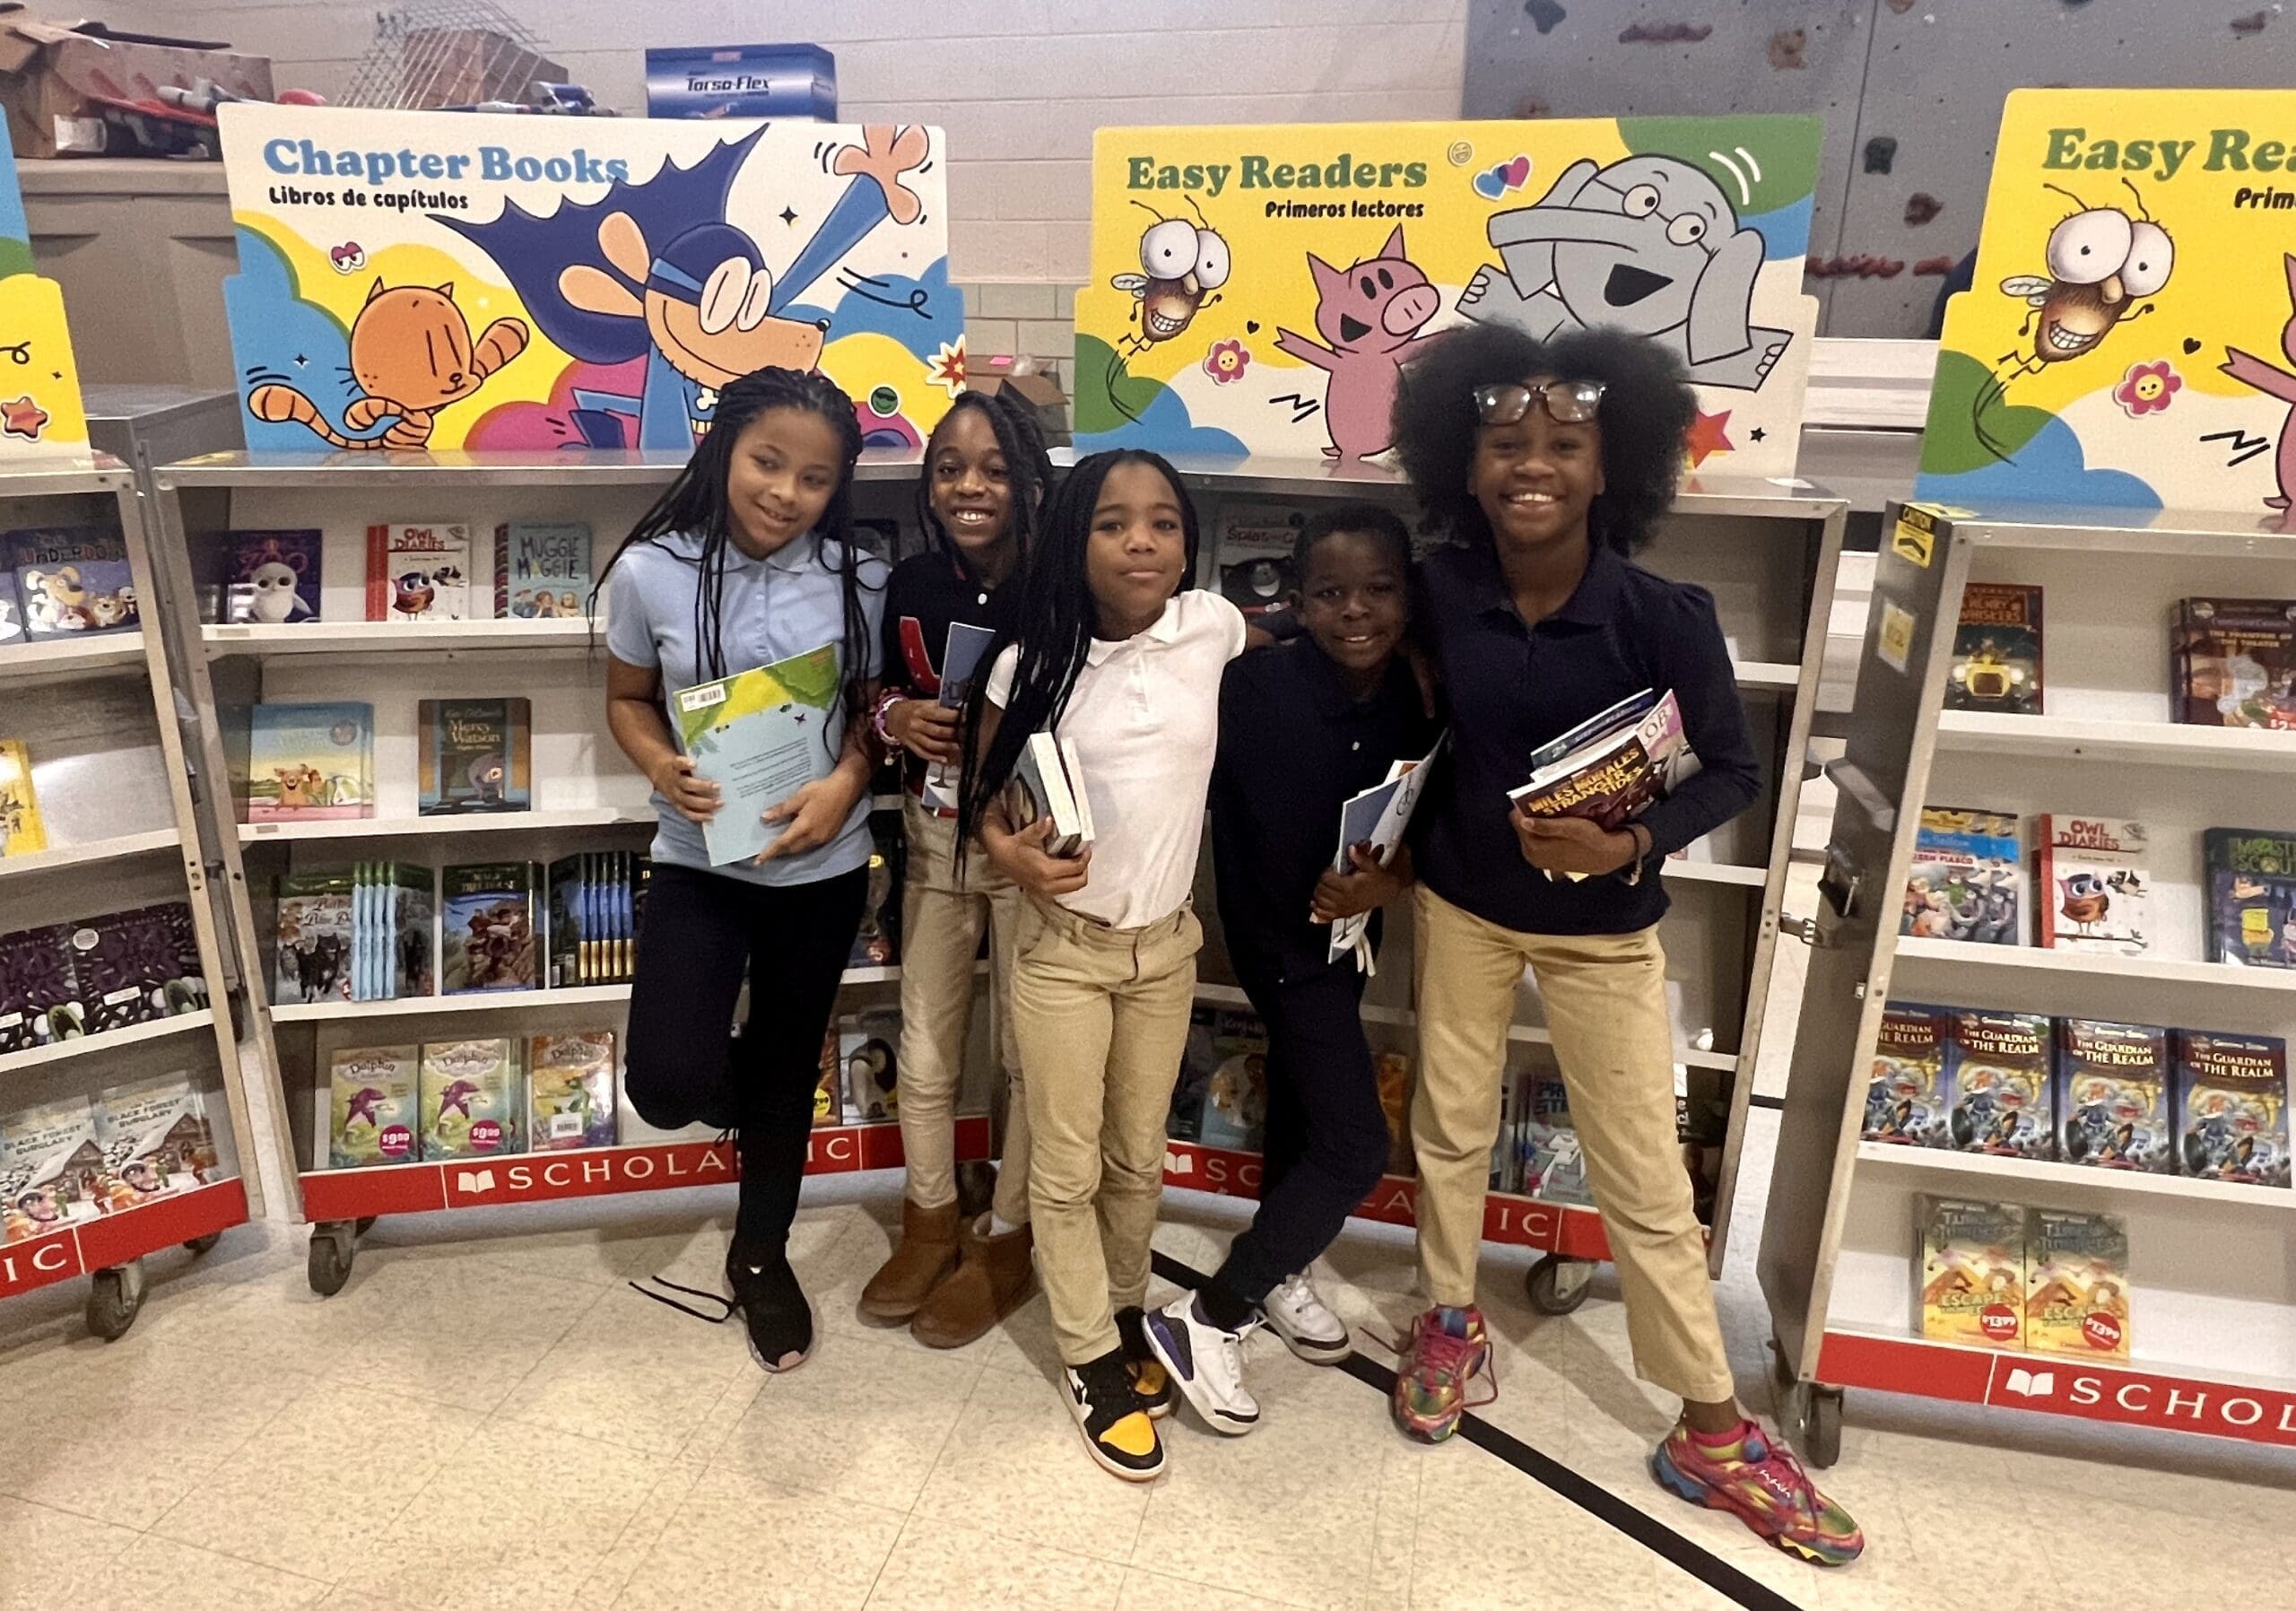 Edison students take home 5 free books they pick out